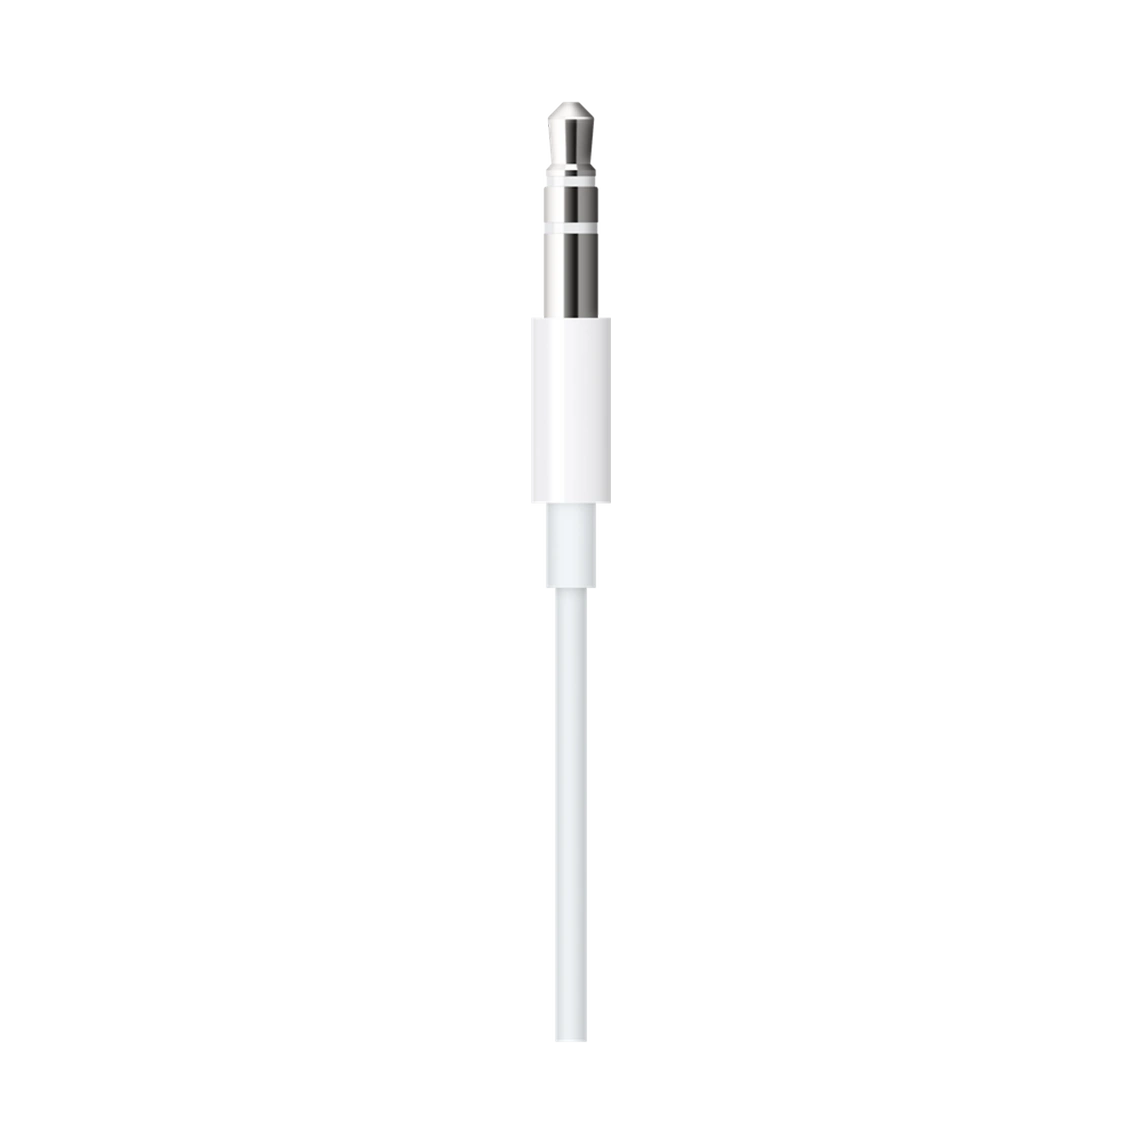 apple-lightning-to-3-5-mm-audio-cable-1-2m